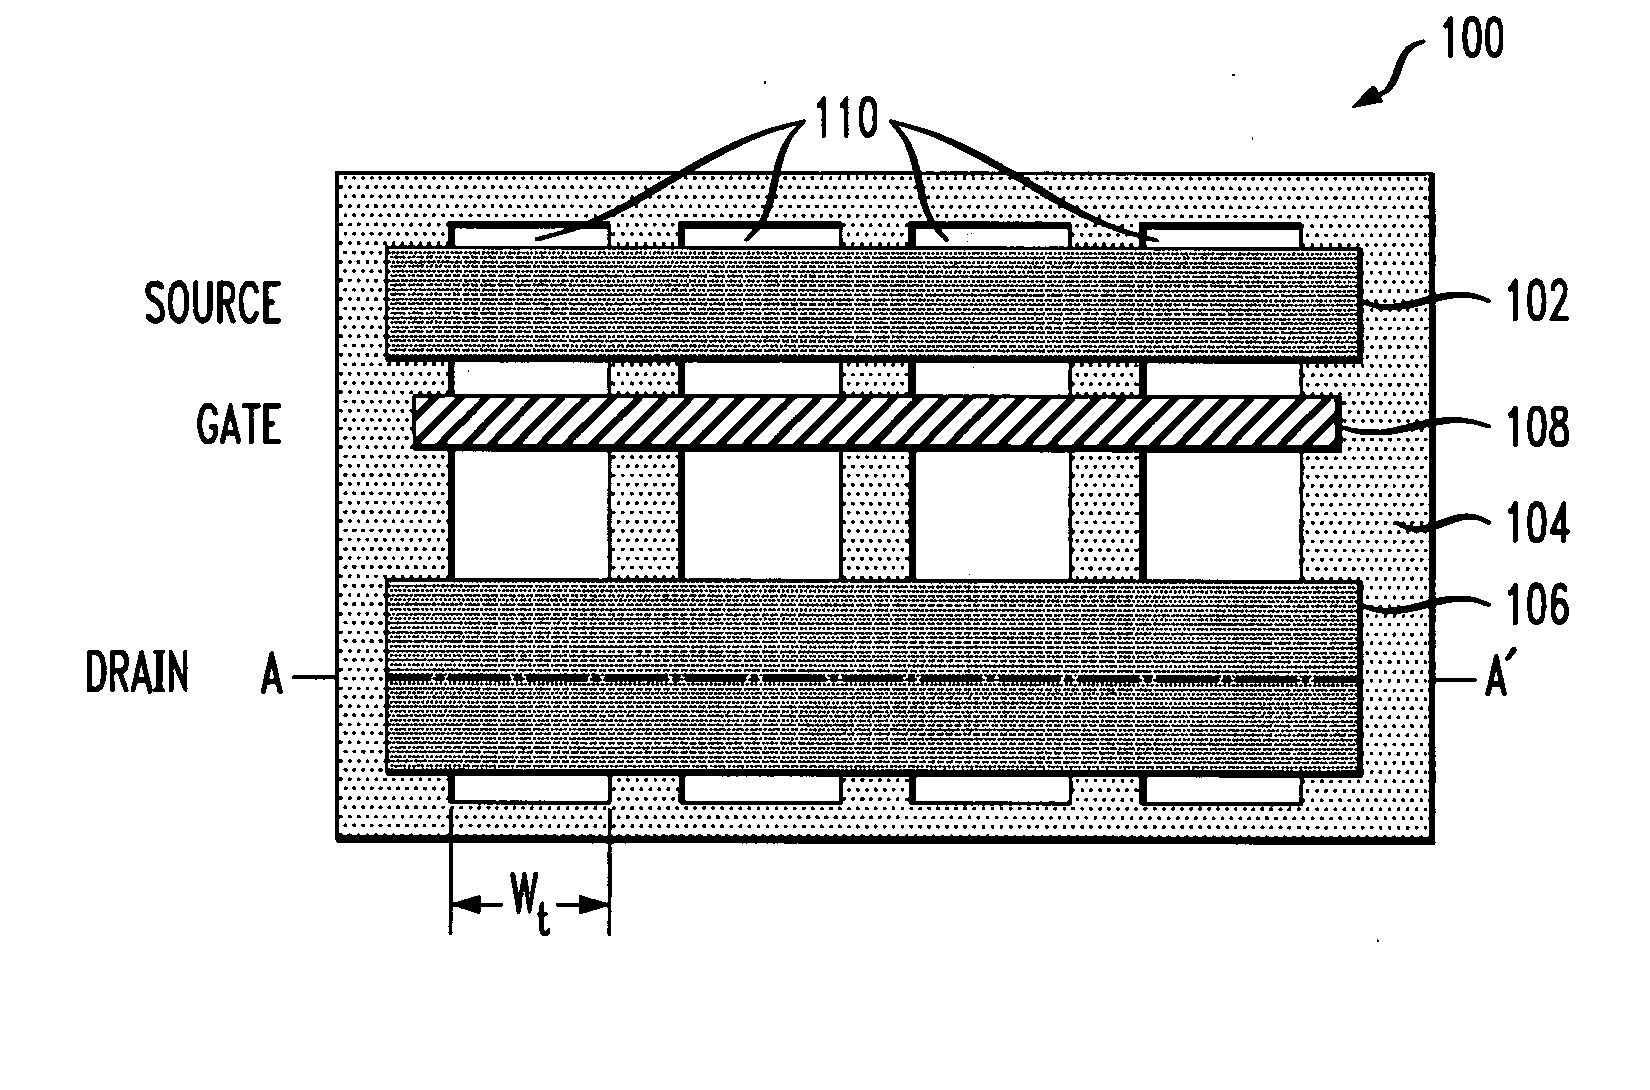 Metal-oxide-semiconductor device having trenched diffusion region and method of forming same